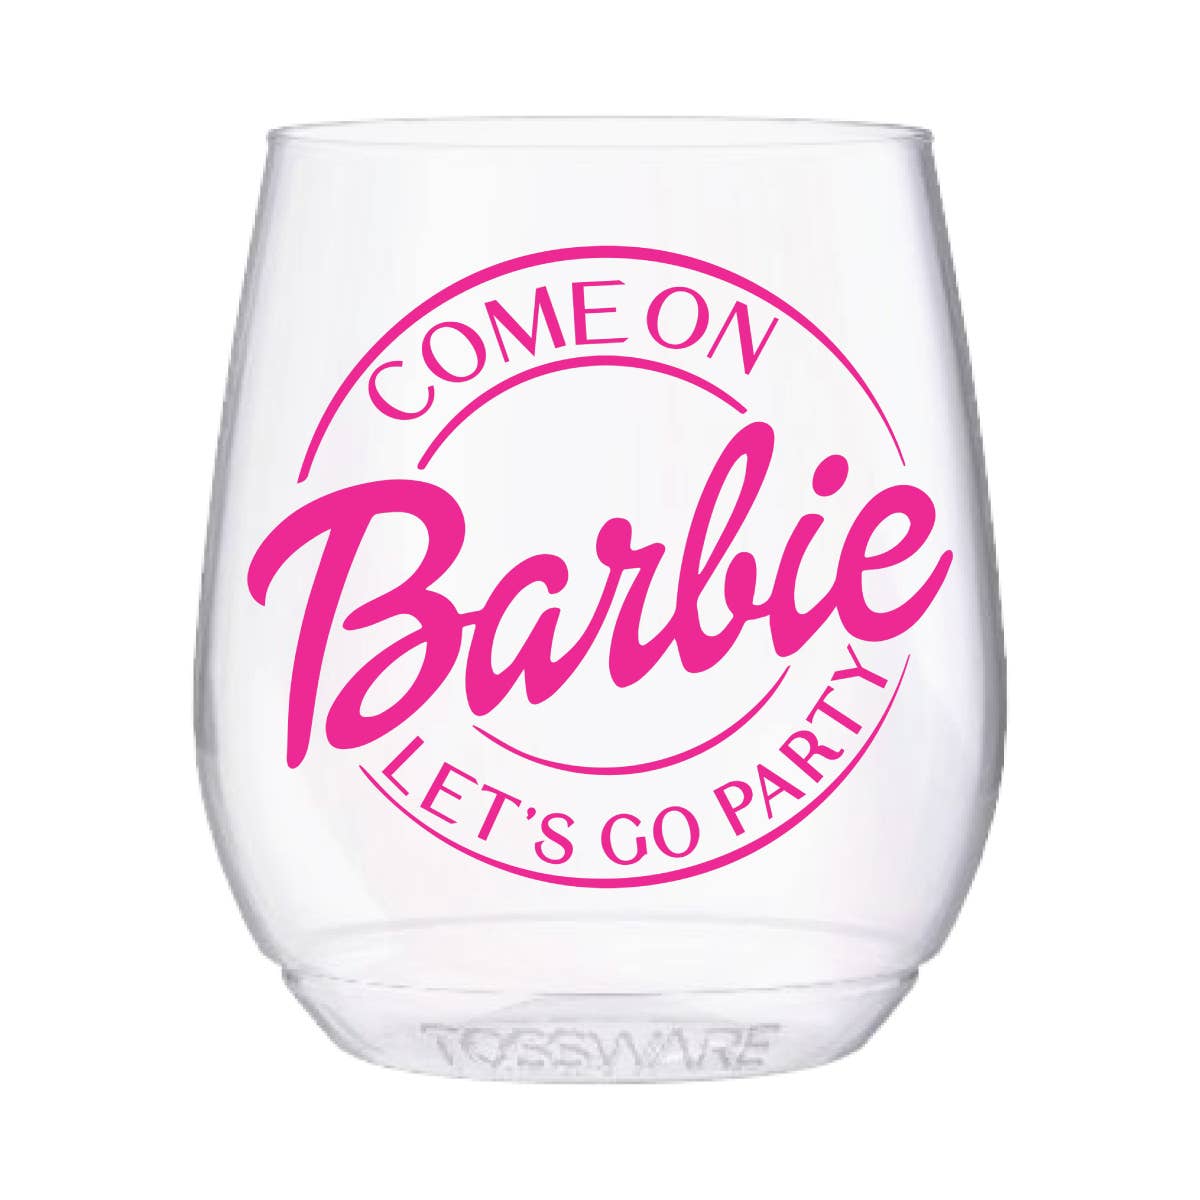 Come on Barbie Let's Go Party 14oz Stemless Wine Tossware